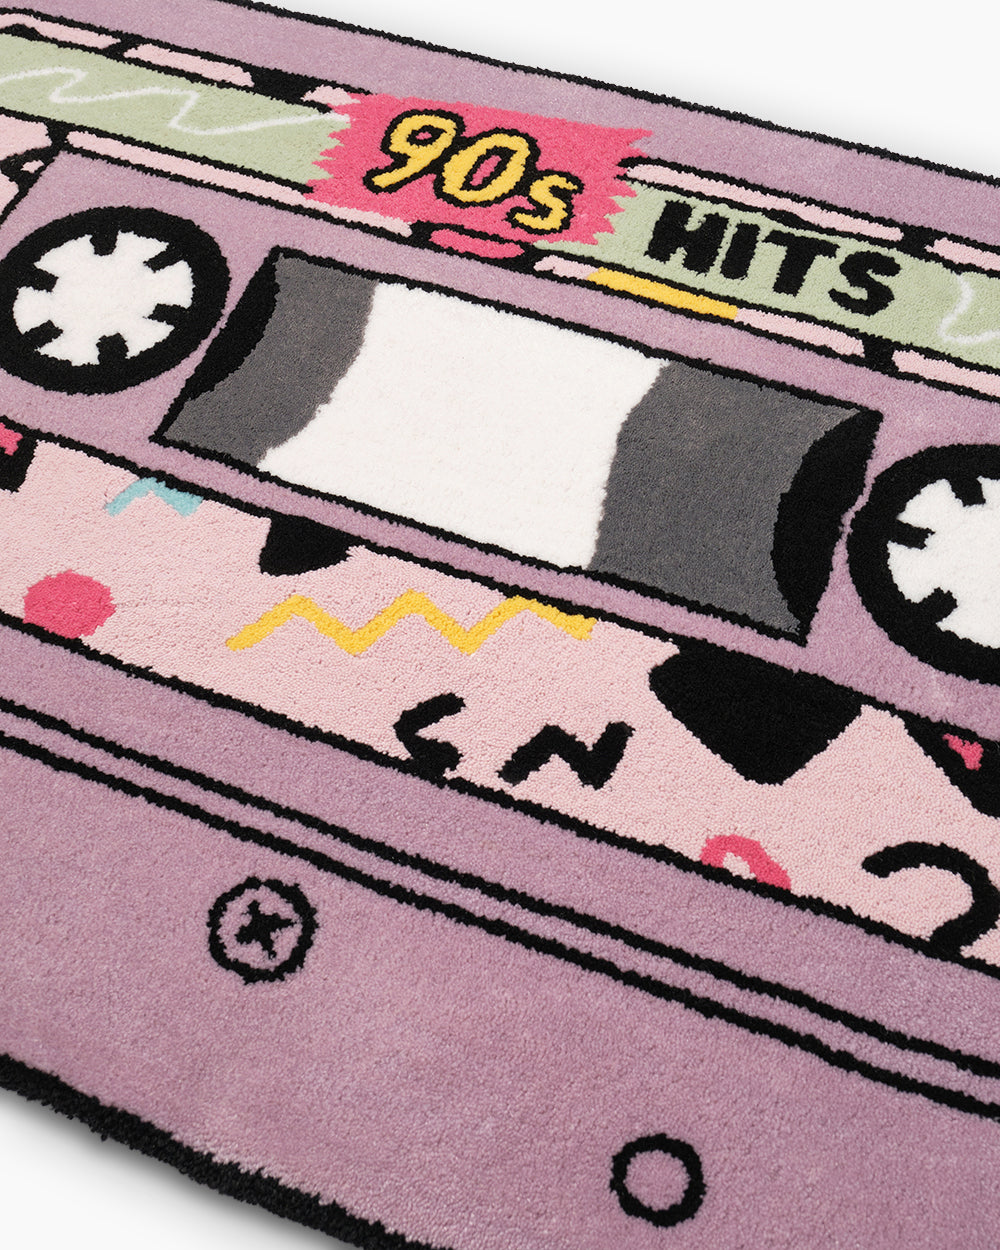 90's Hit's  Tufted Rug | Threadheads Exclusive